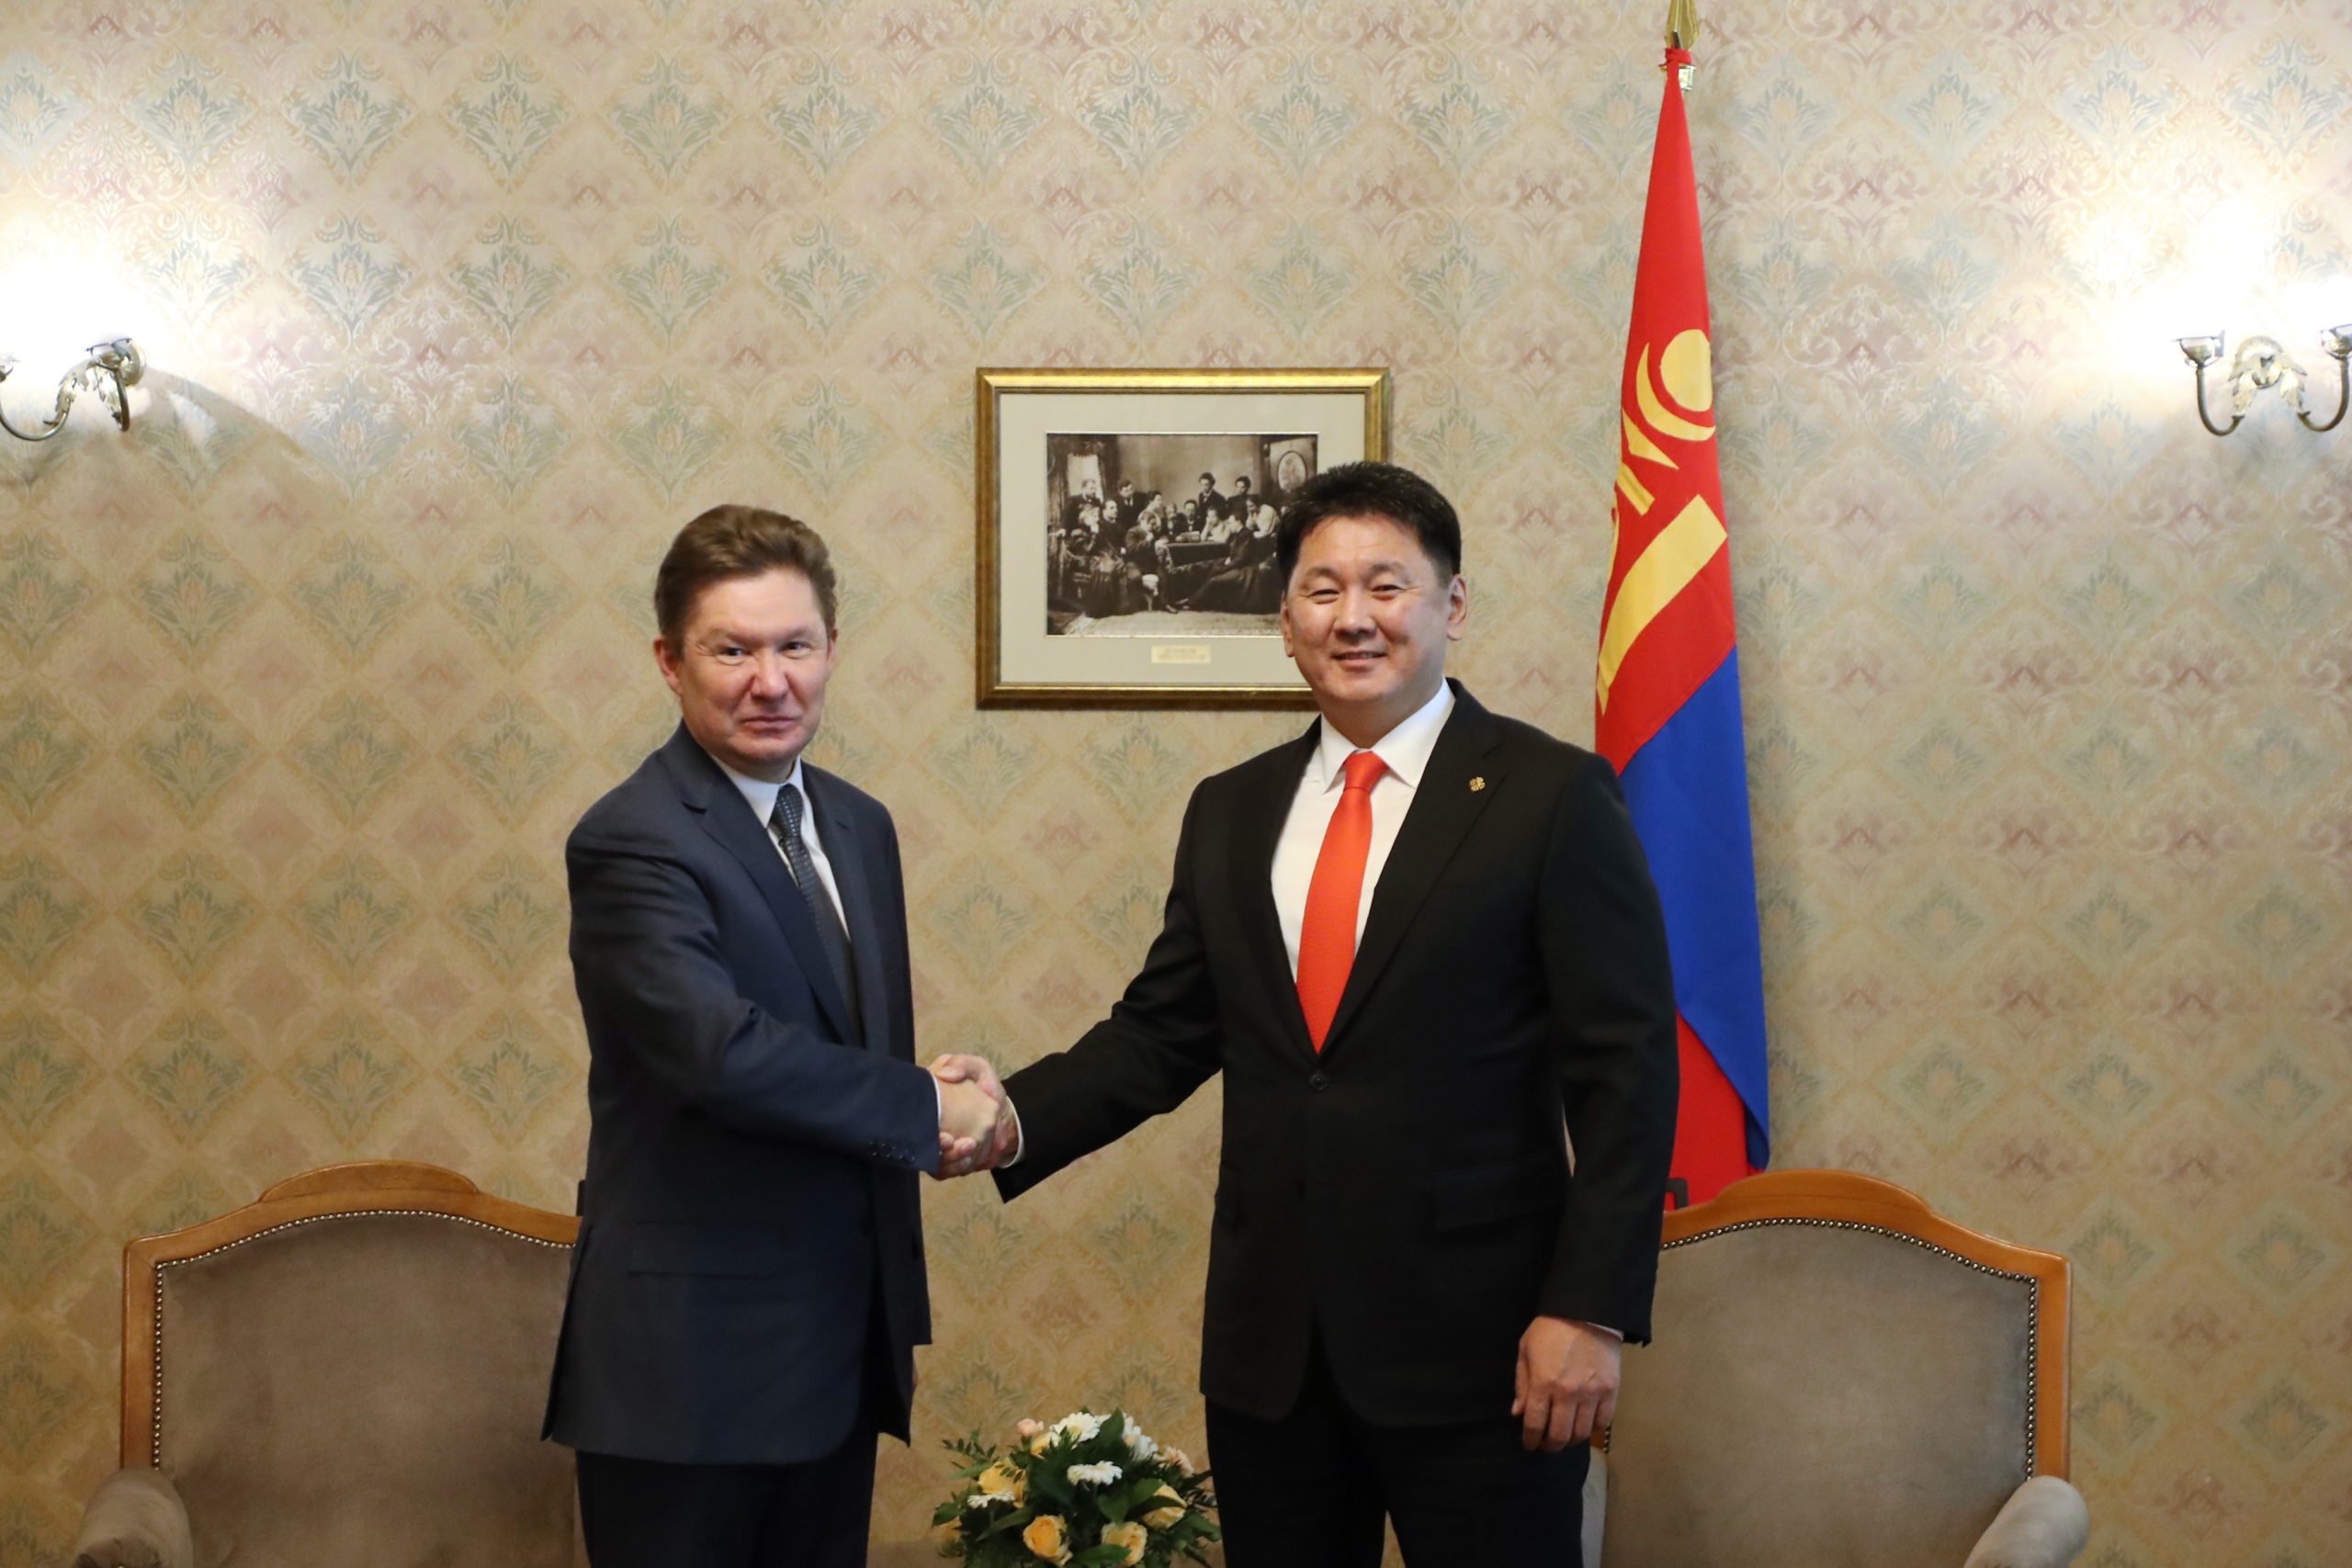 Chairman of Gazprom Management Committee and Mongolia’s Prime Minister discuss cooperation prospects